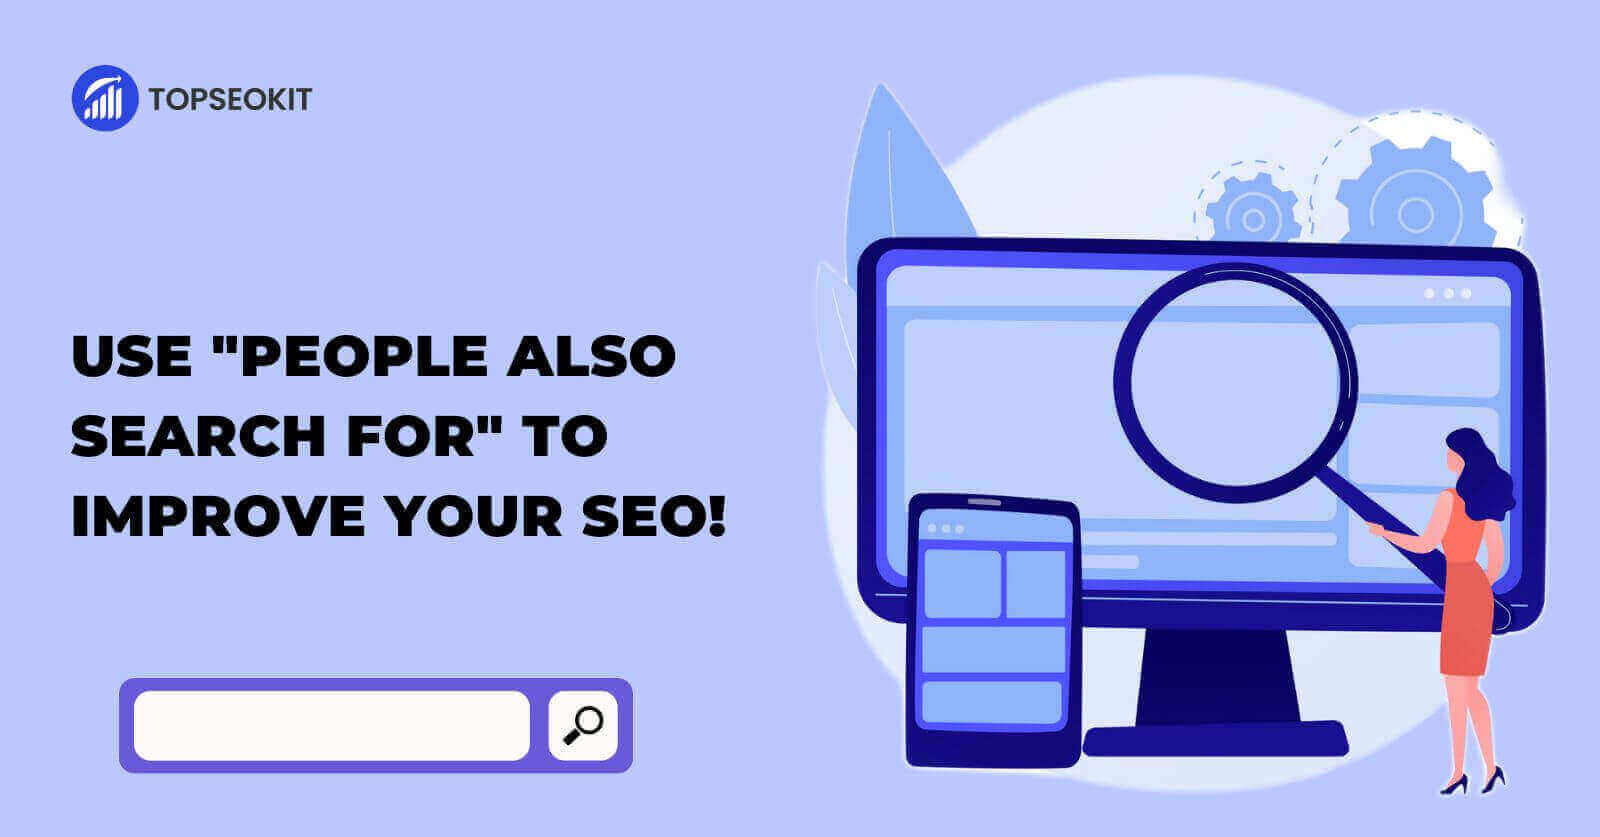 Use “People Also Search For” To Improve Your SEO